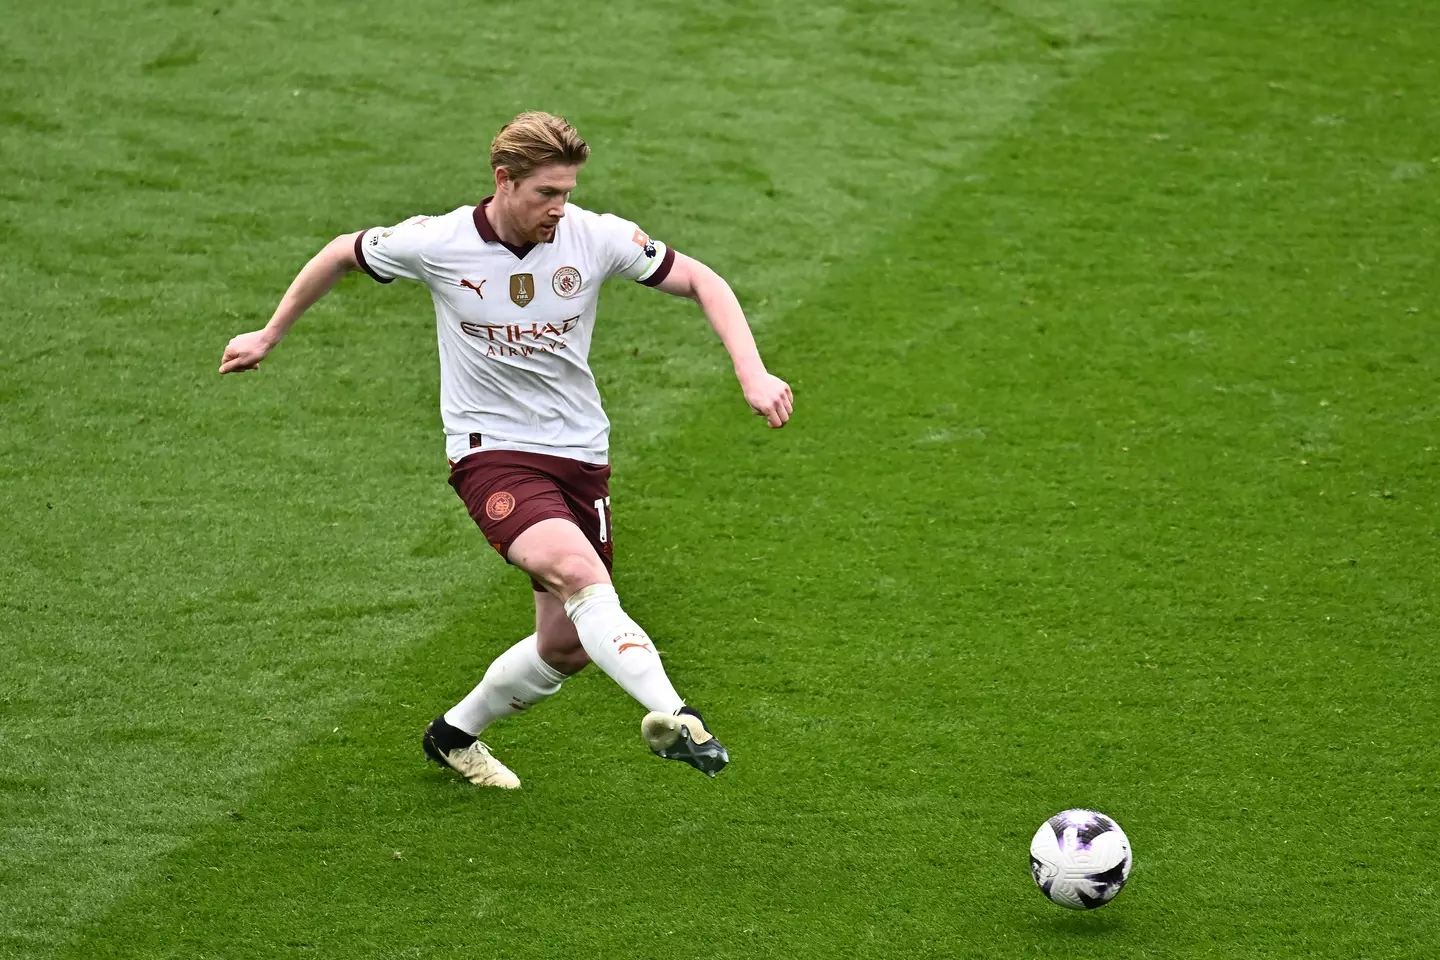 De Bruyne is the best player Dide has played against (Getty)